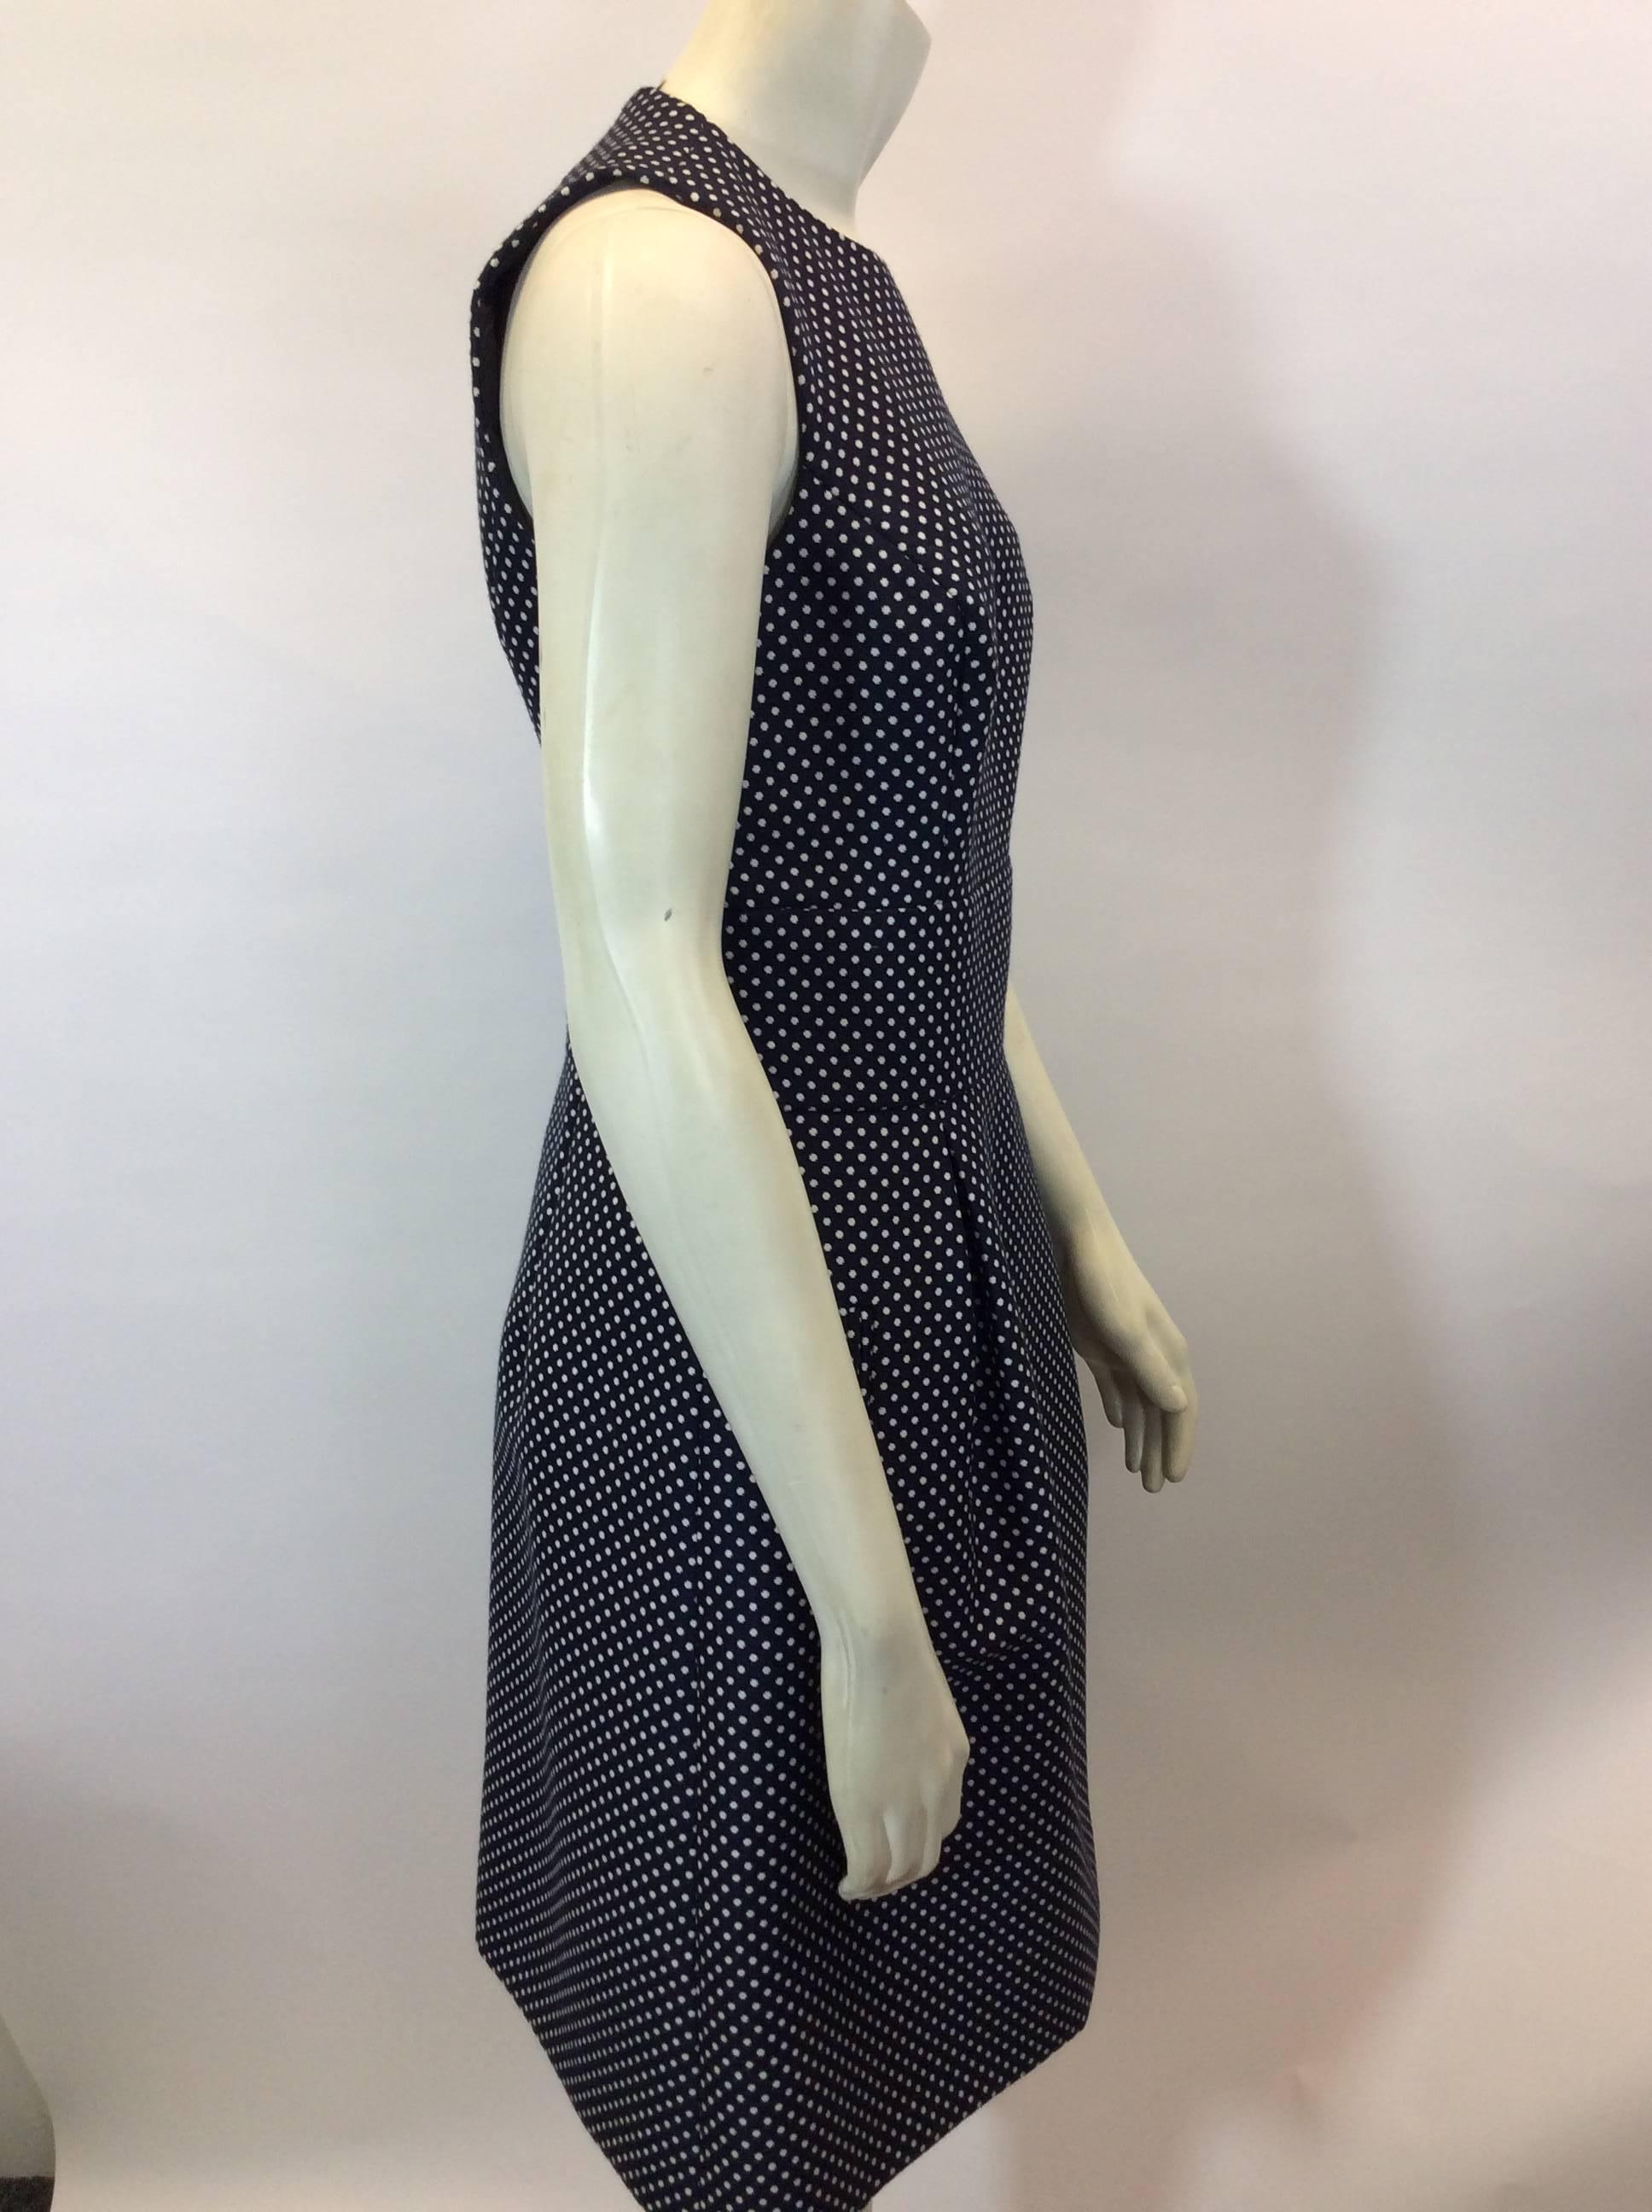 Michael Kors Polka Dot Wool Dress 
Made in Italy
Size 6
2 front hip pockets, fully lined interior of dress
$150
100% wool